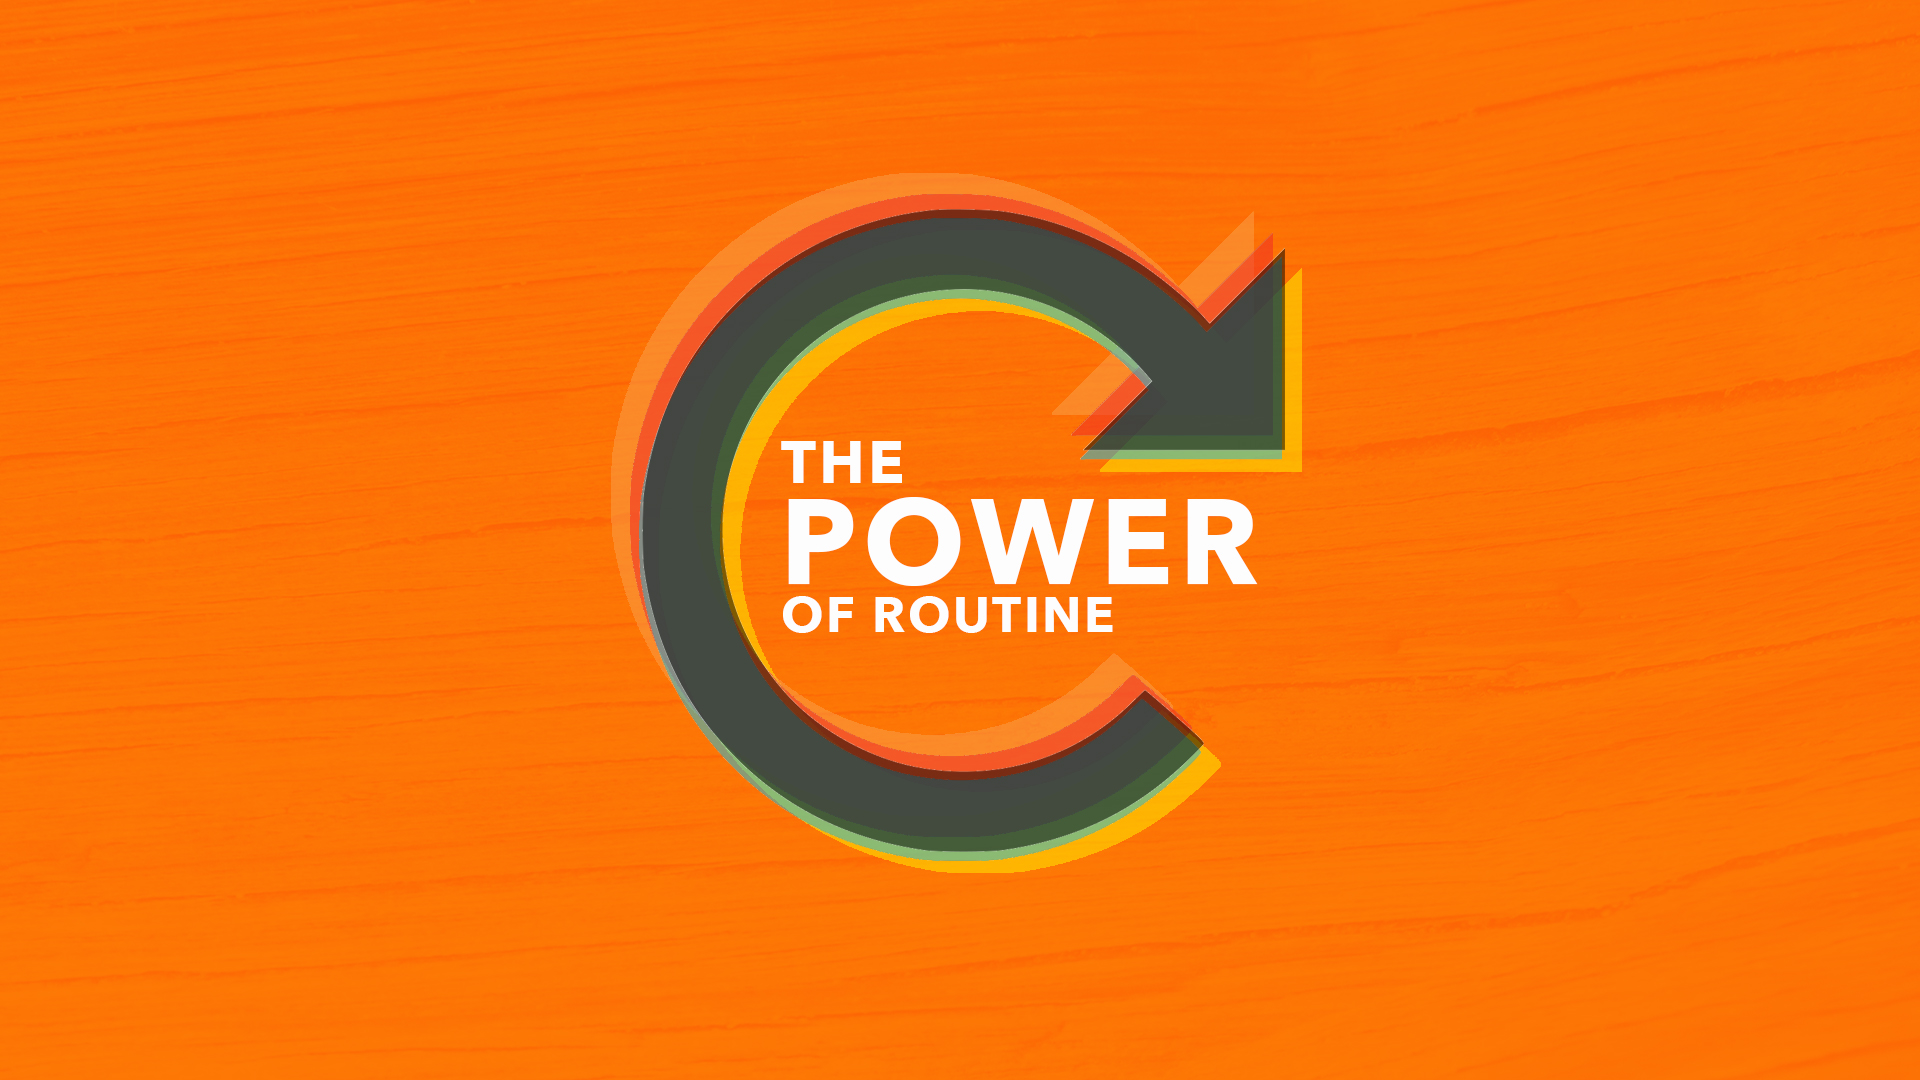 The Power of Routine: Christ-Centred Community